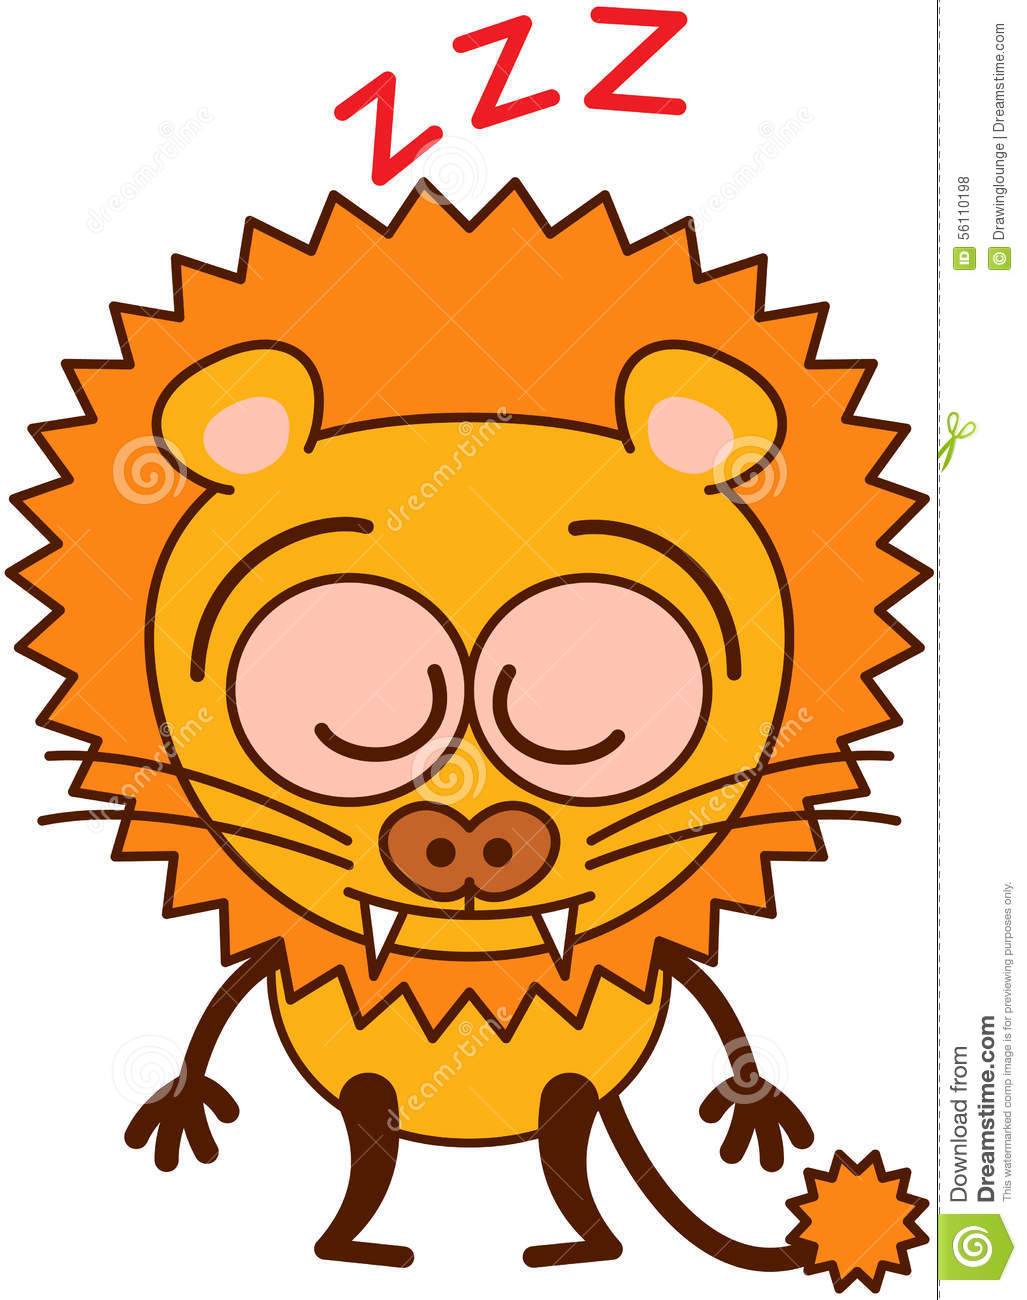 Cute Lion In Minimalistic Style With Rounded Ears Sharp Teeth